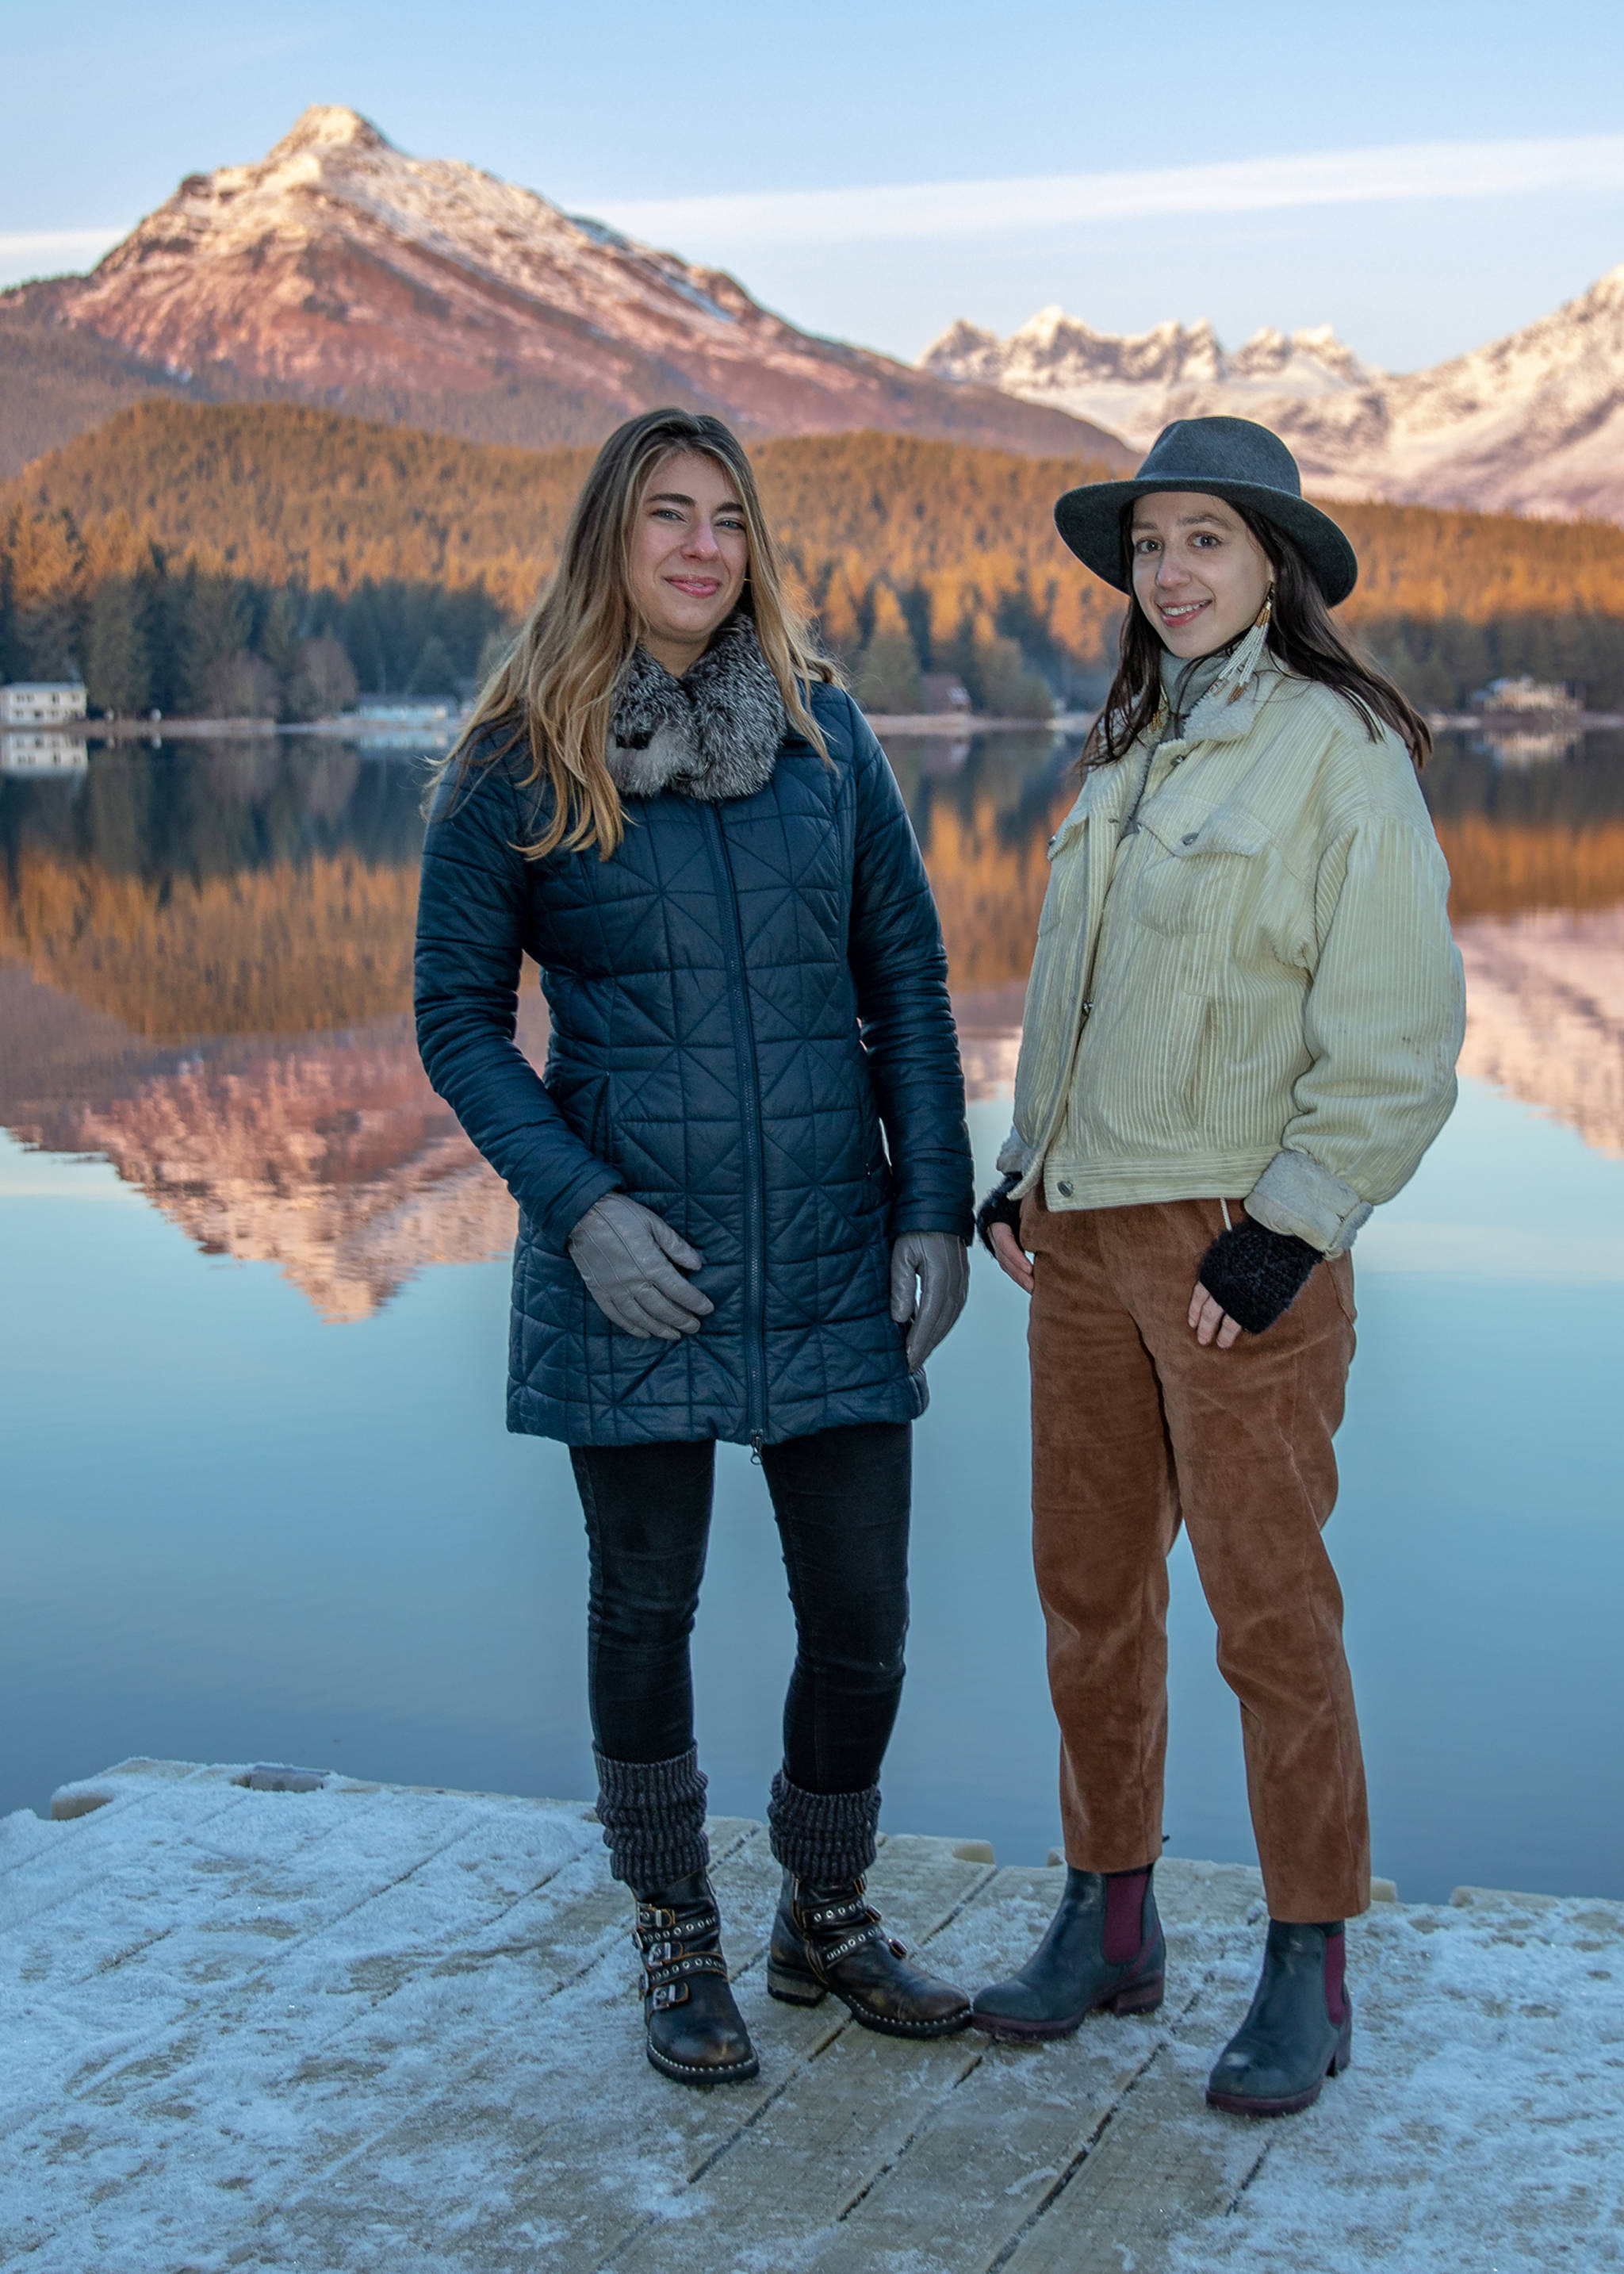 Dec. 16, 2018: On a cold December afternoon, Dana Herndon and Serena Drazkowski stopped by Auke Lake to catch the sunset. Dana was wearing a navy puff jacket from The North Face, black pants, UGG boots, Boheme texting gloves and a mink neck ruff. Serena stayed warm in brown corduroy overalls and white corduroy jacket, topped off by a gray Pendleton wool hat and black Bueno boots from Shoefly.